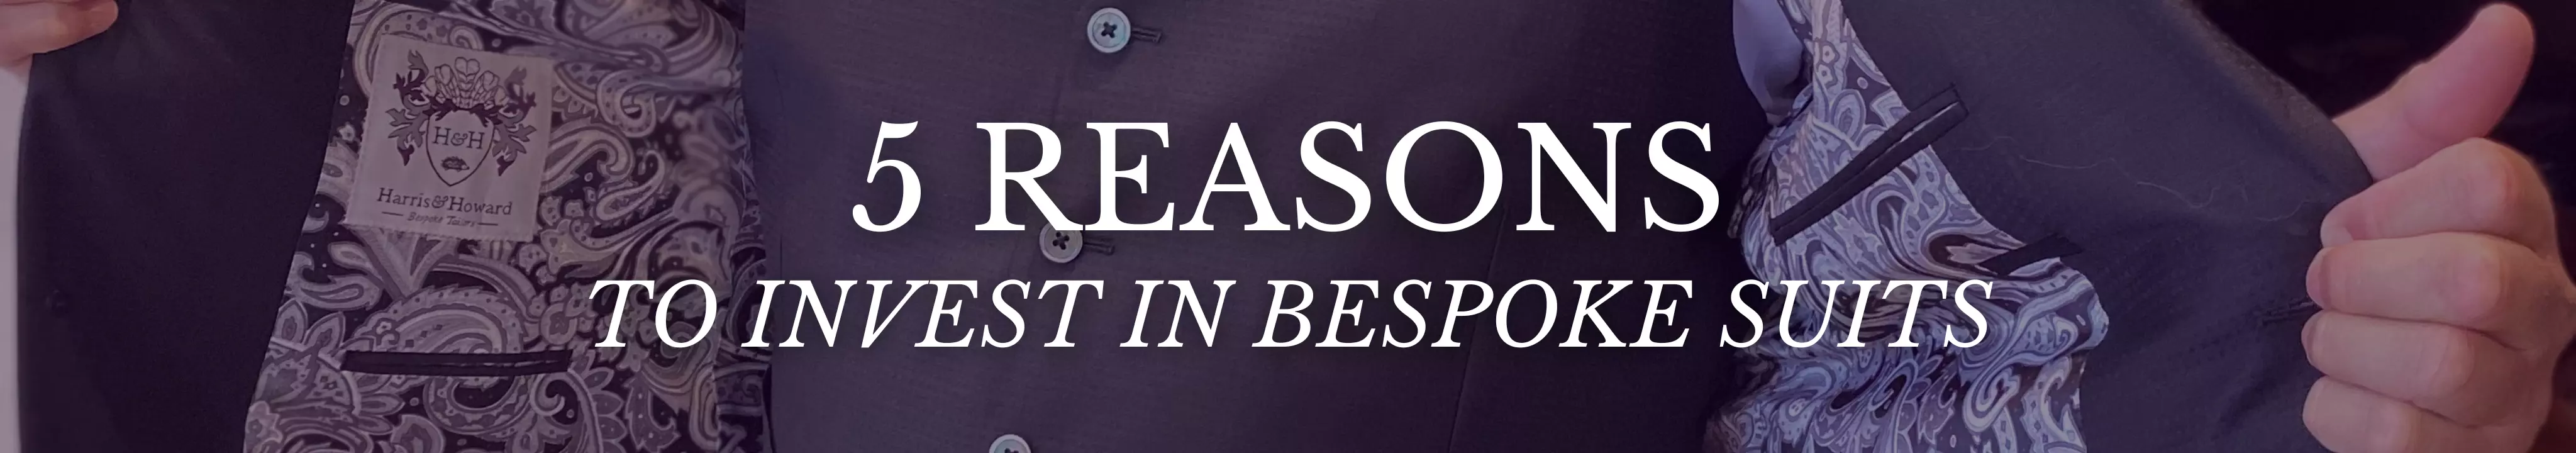 5 Reasons to Invest in Bespoke Suits